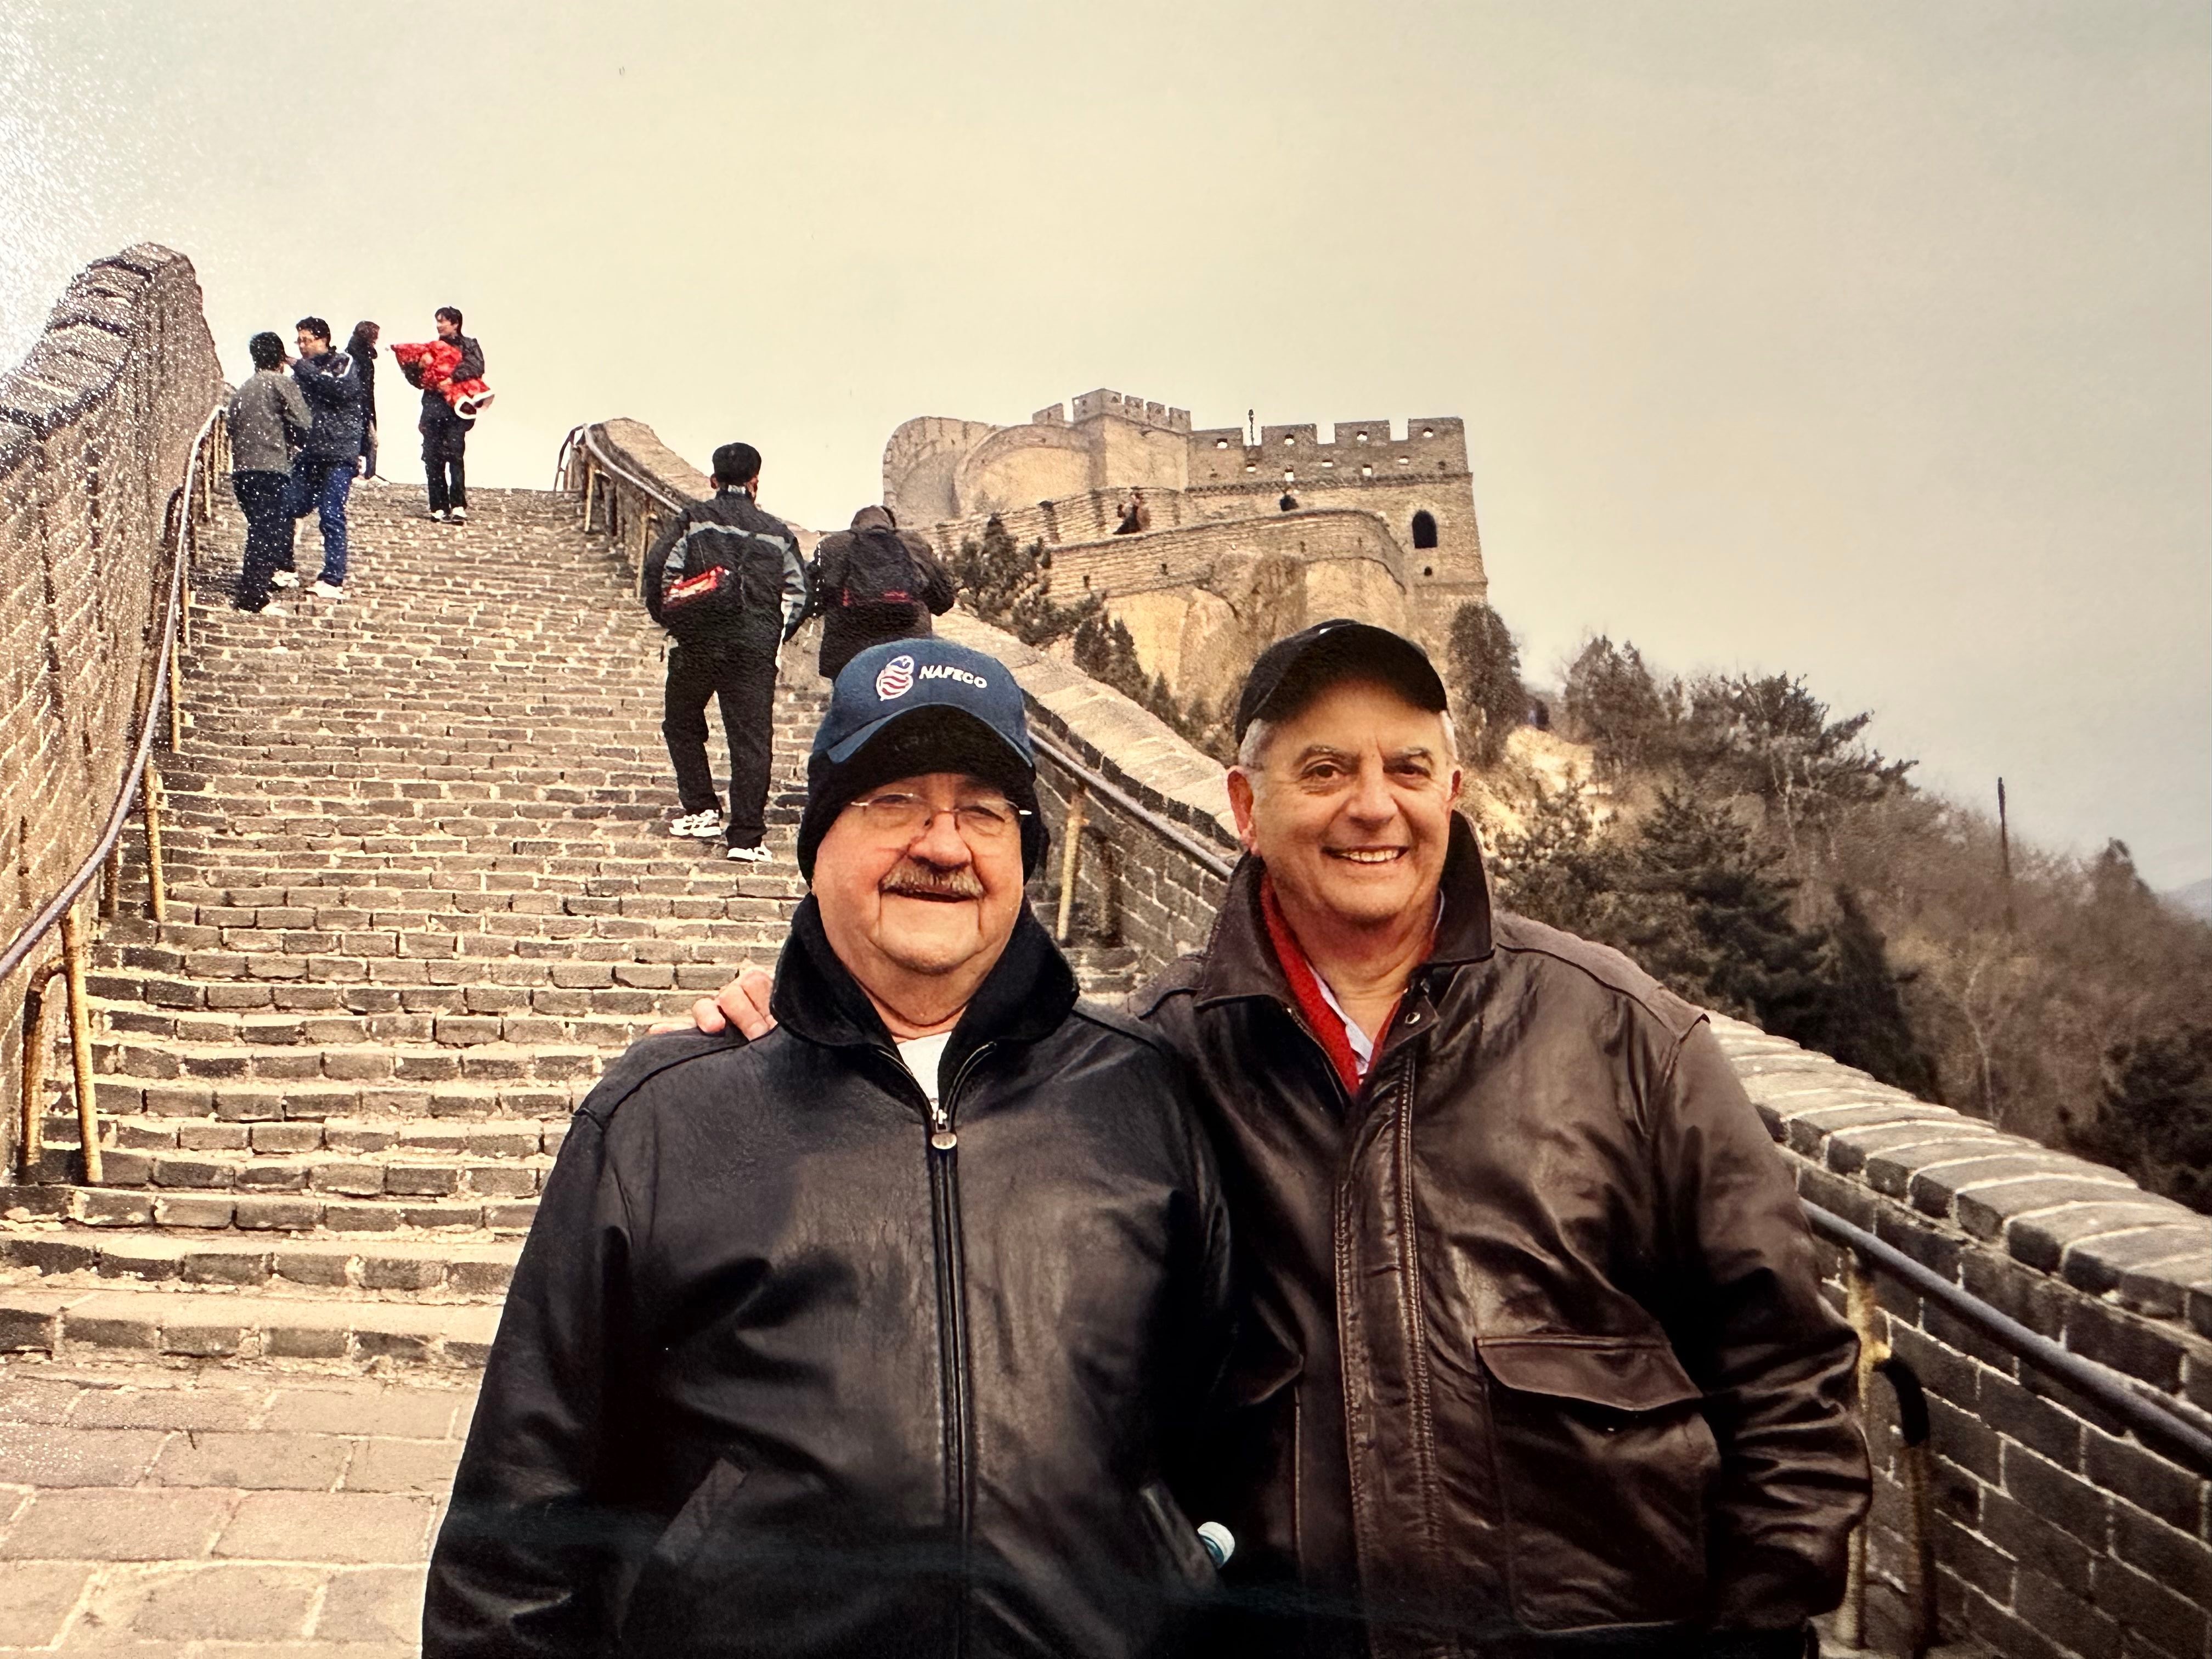 Allan with Jerrell Oats at the Great Wall of China, 2008